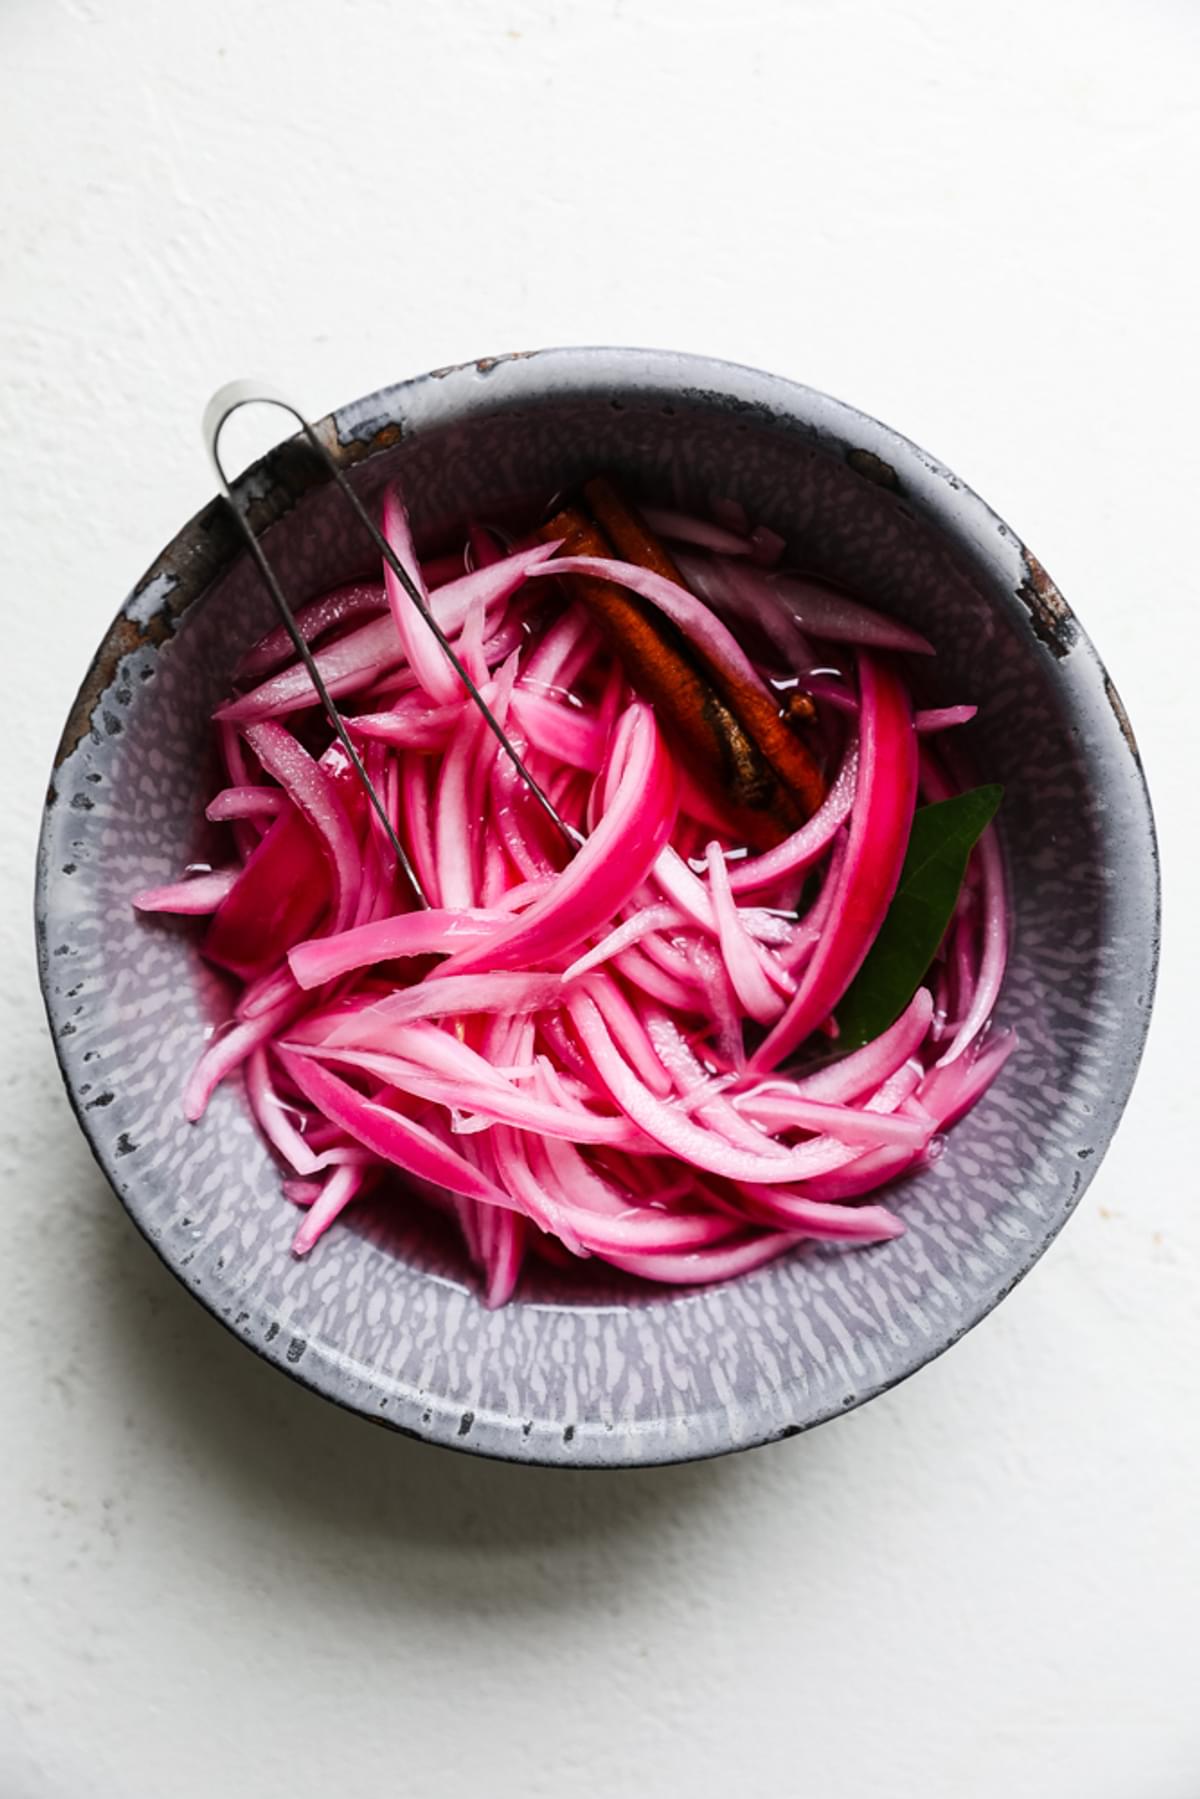 pickled onion recipe in a bowl with tongs